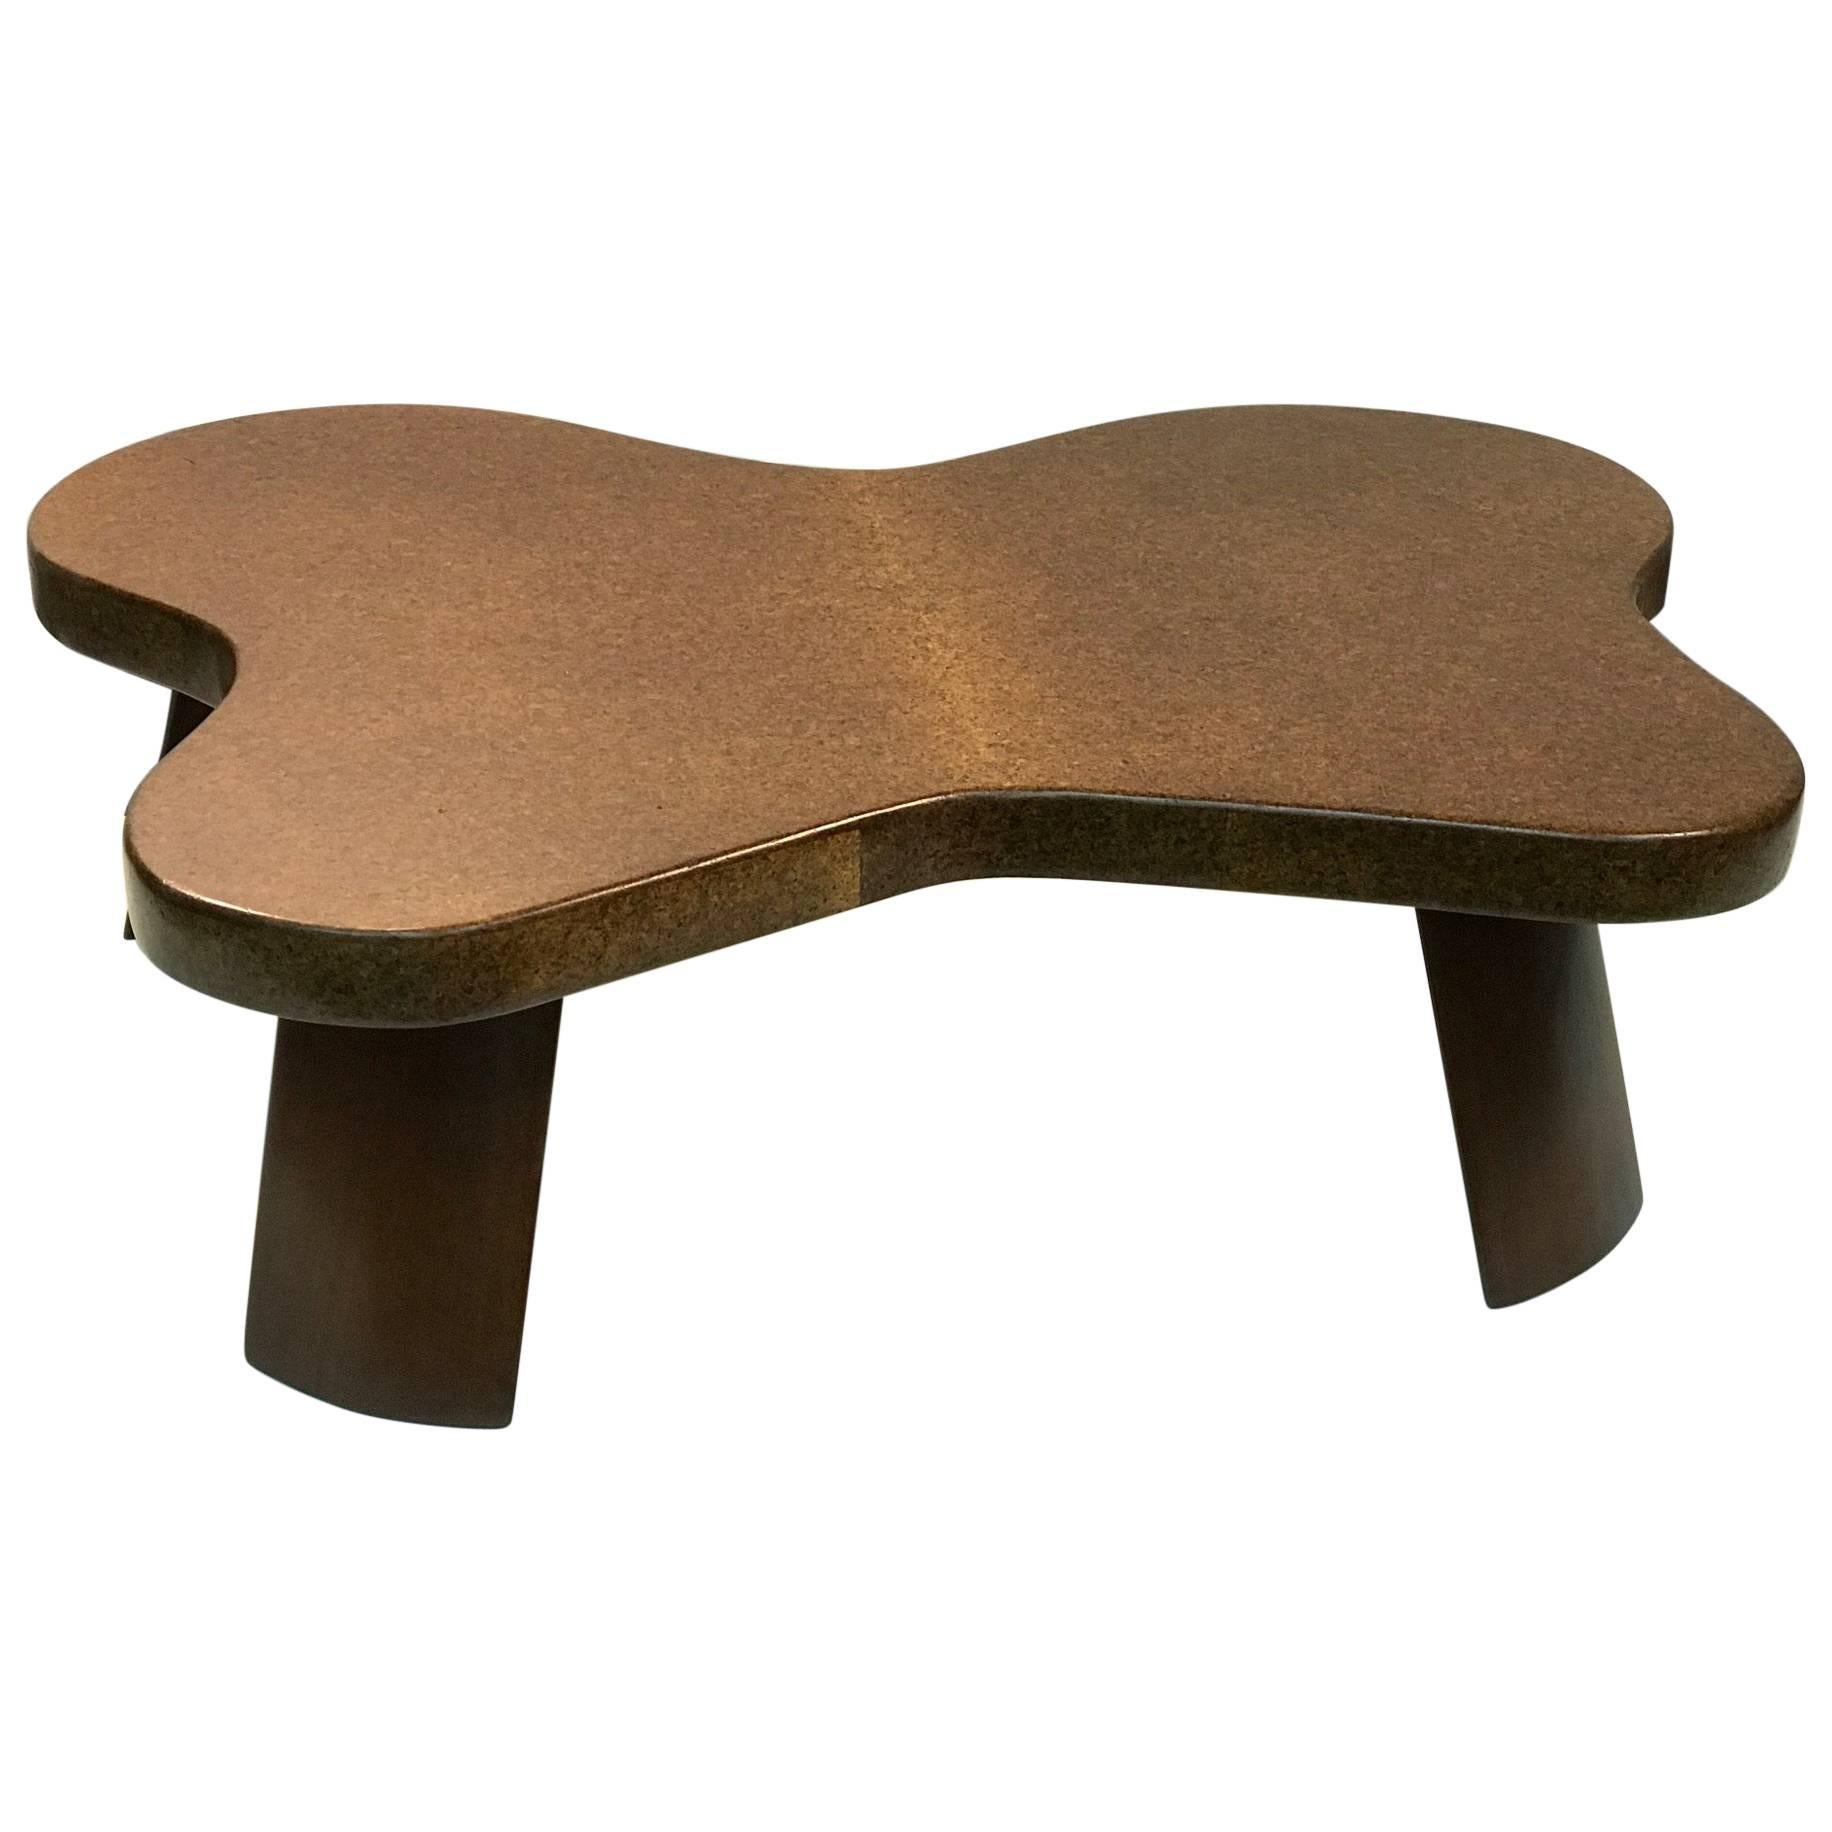 Mid-Century Modernist "Amoeba" Cork-Top Cocktail Table by Paul Frankl